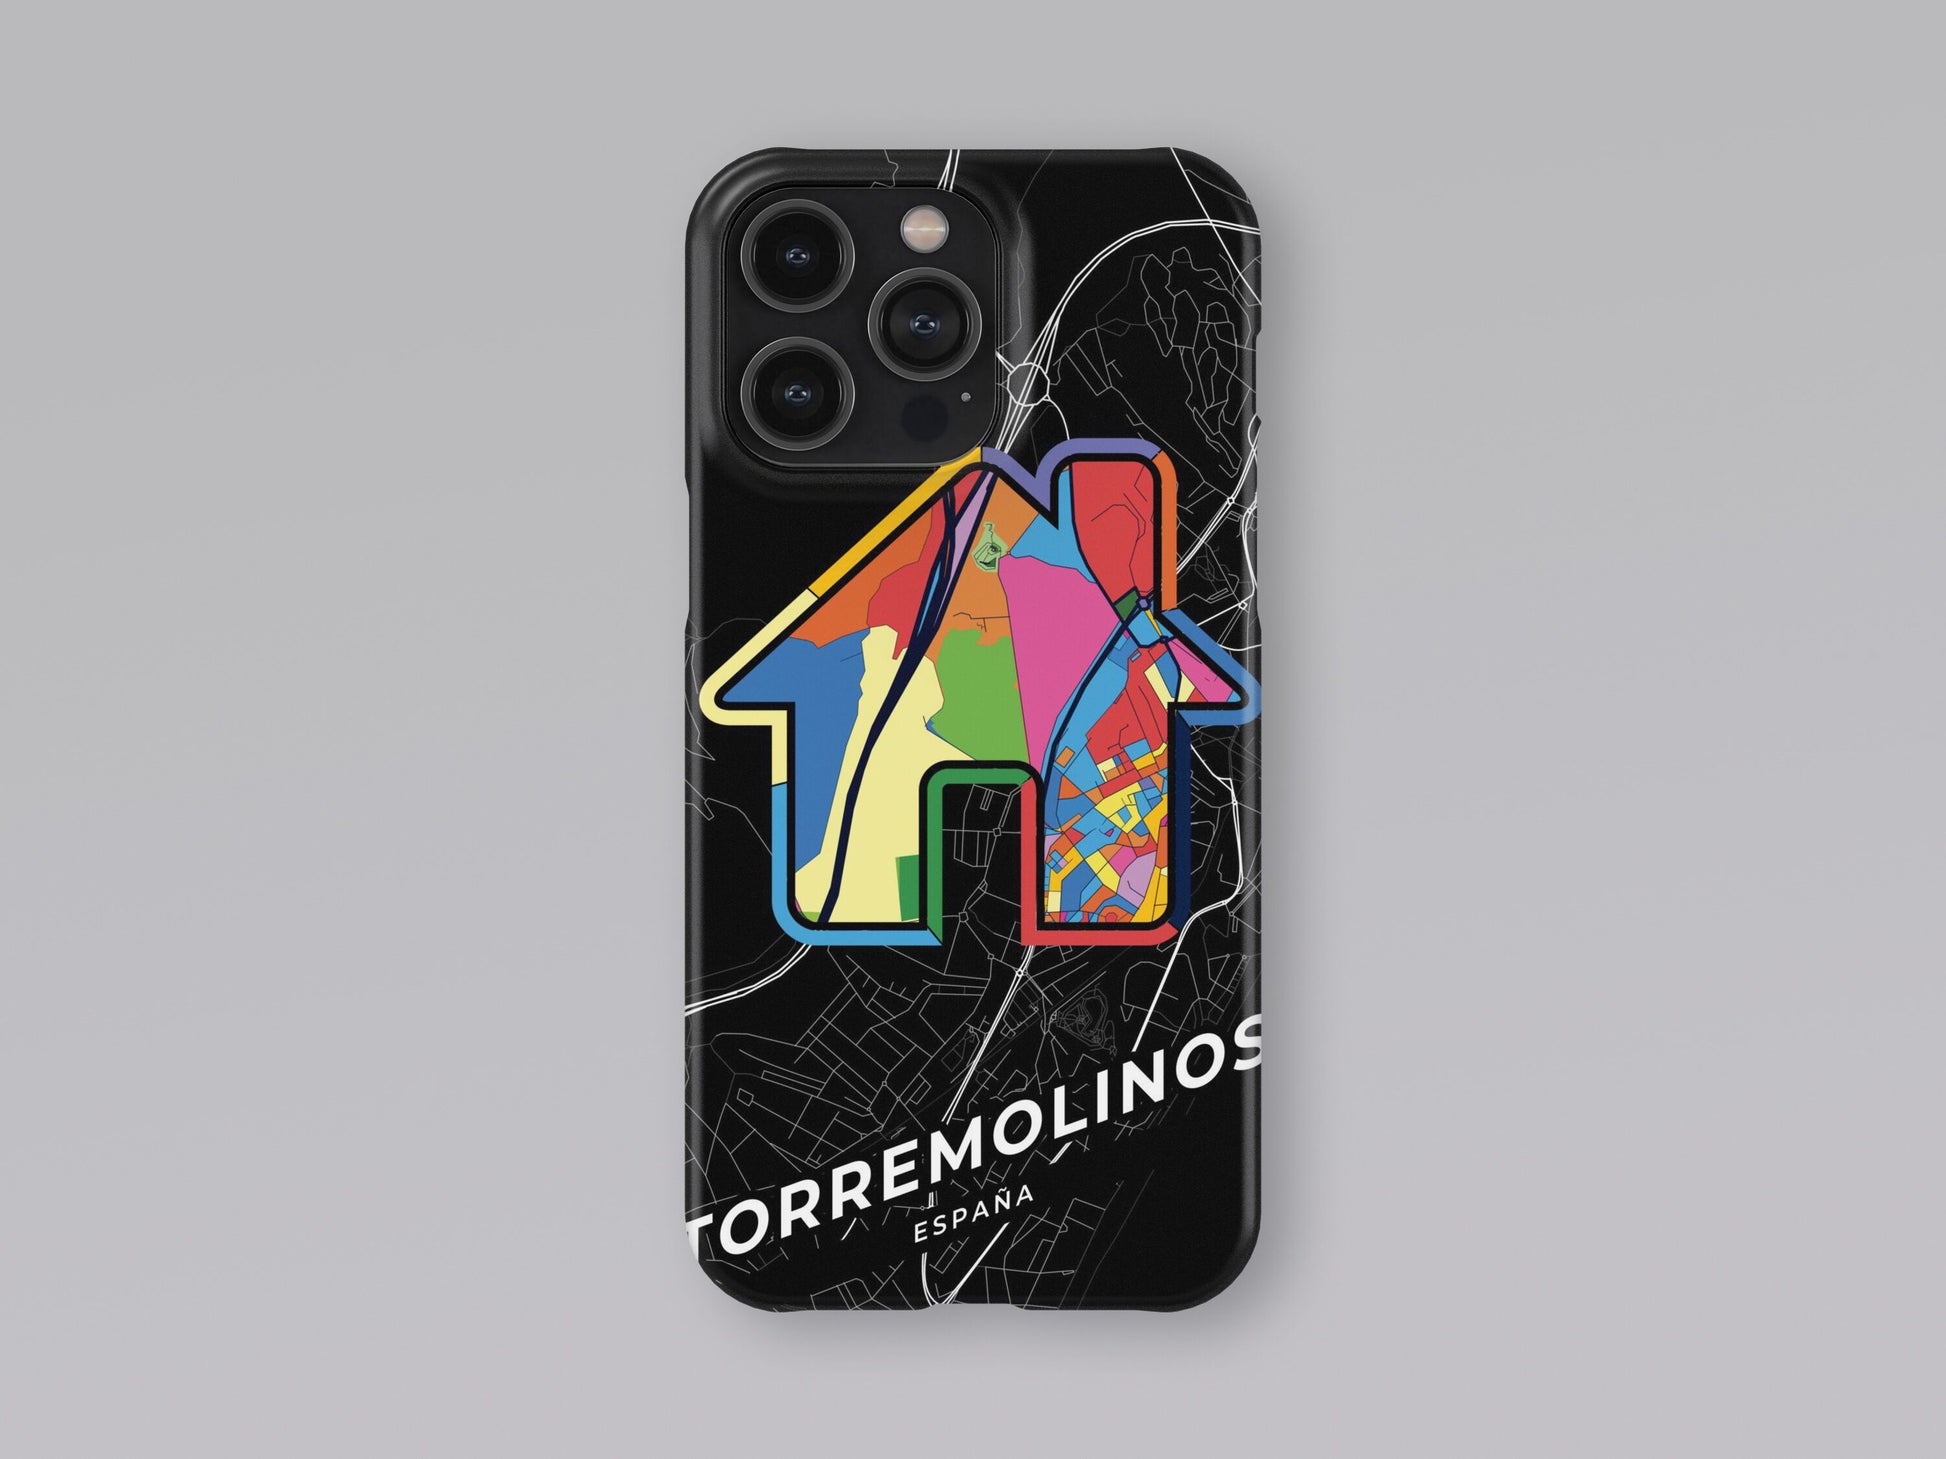 Torremolinos Spain slim phone case with colorful icon. Birthday, wedding or housewarming gift. Couple match cases. 3